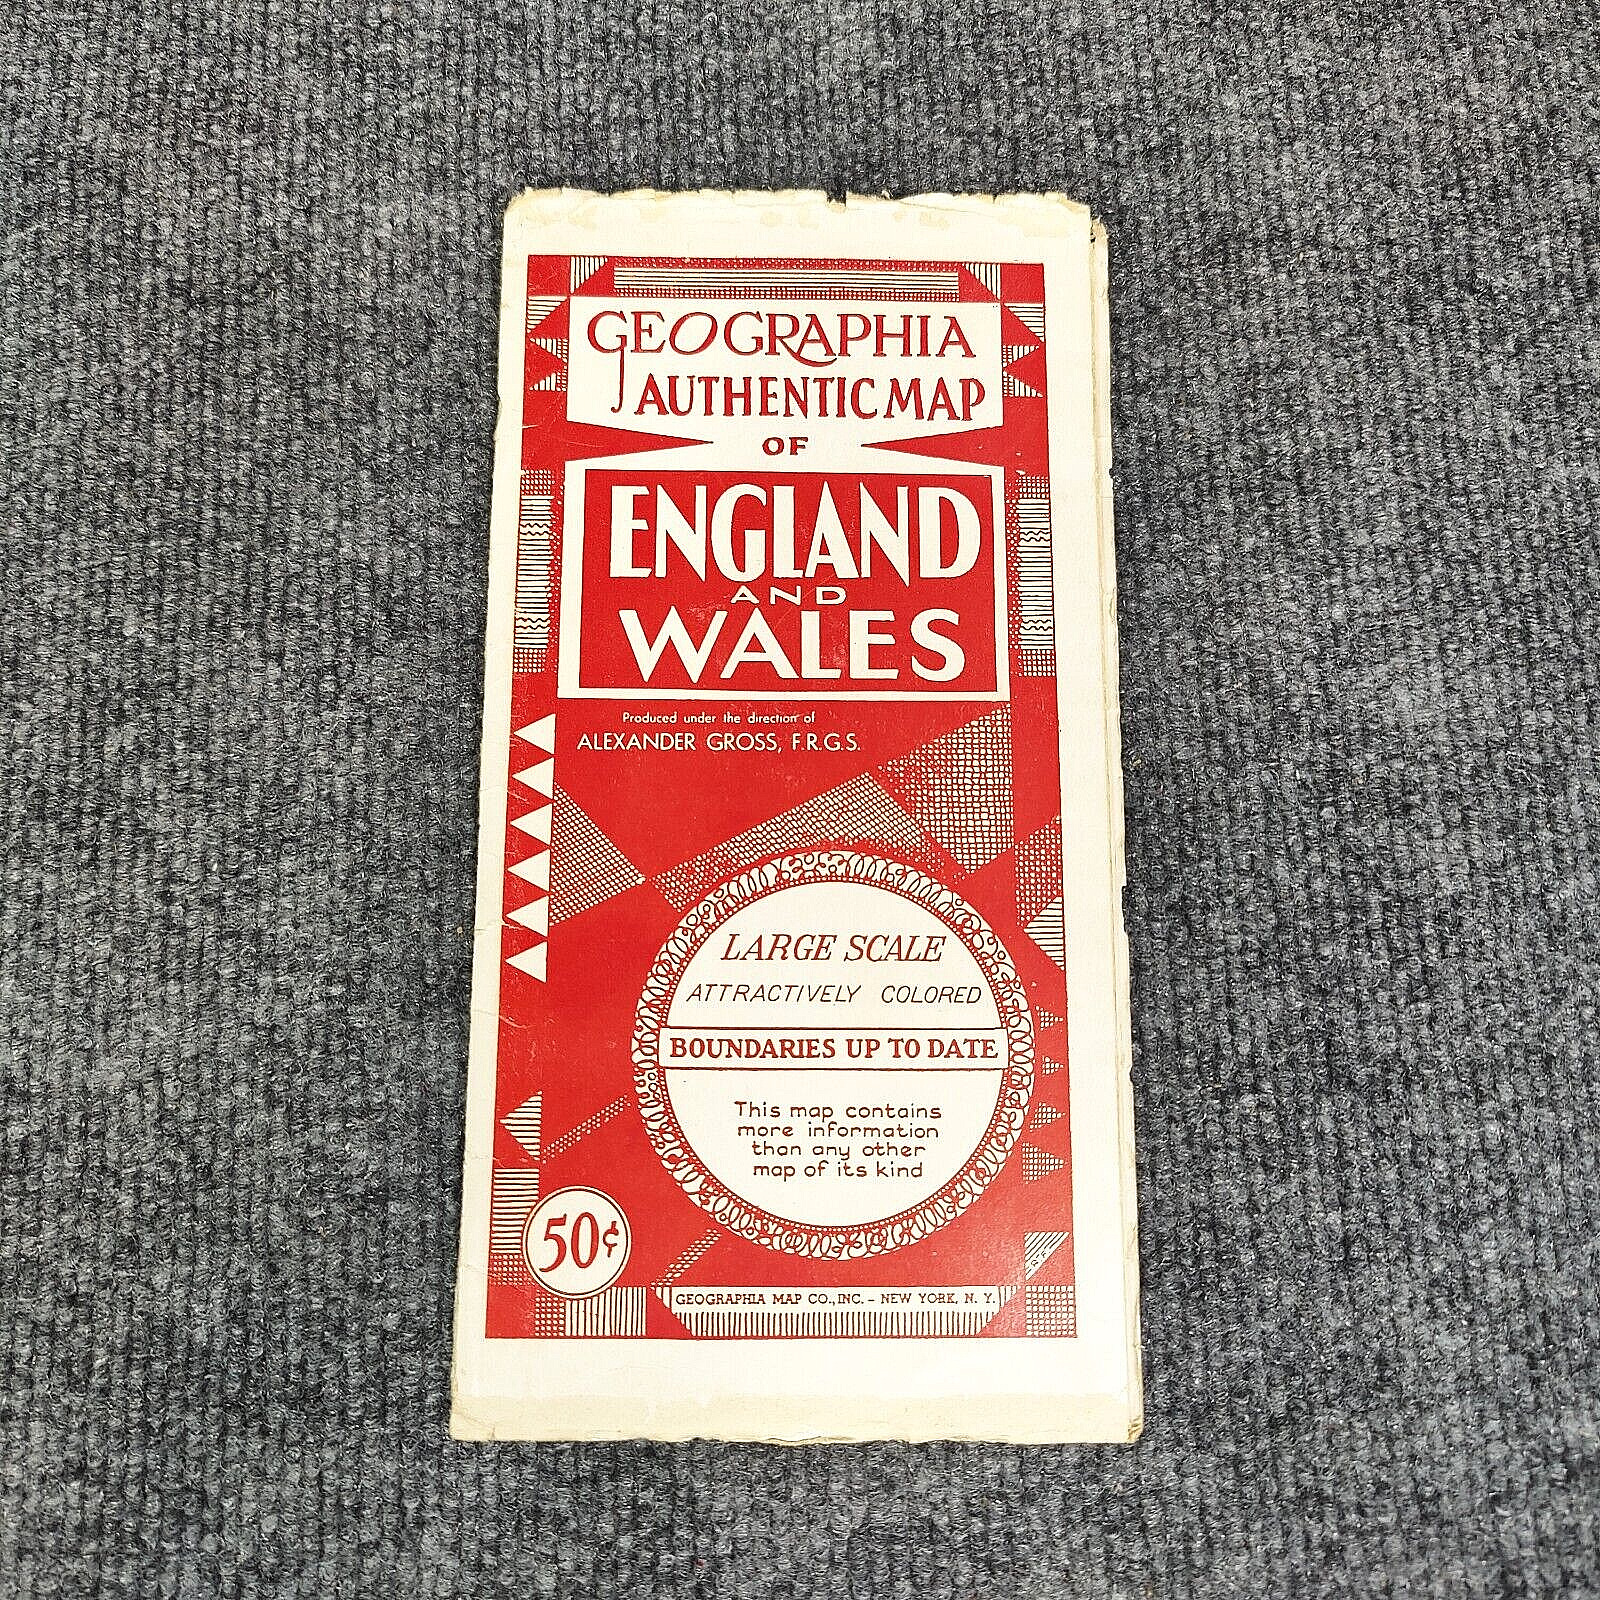 Vintage ENGLAND and WALES Geographia Authentic Street Map Alexander Gross FRGS